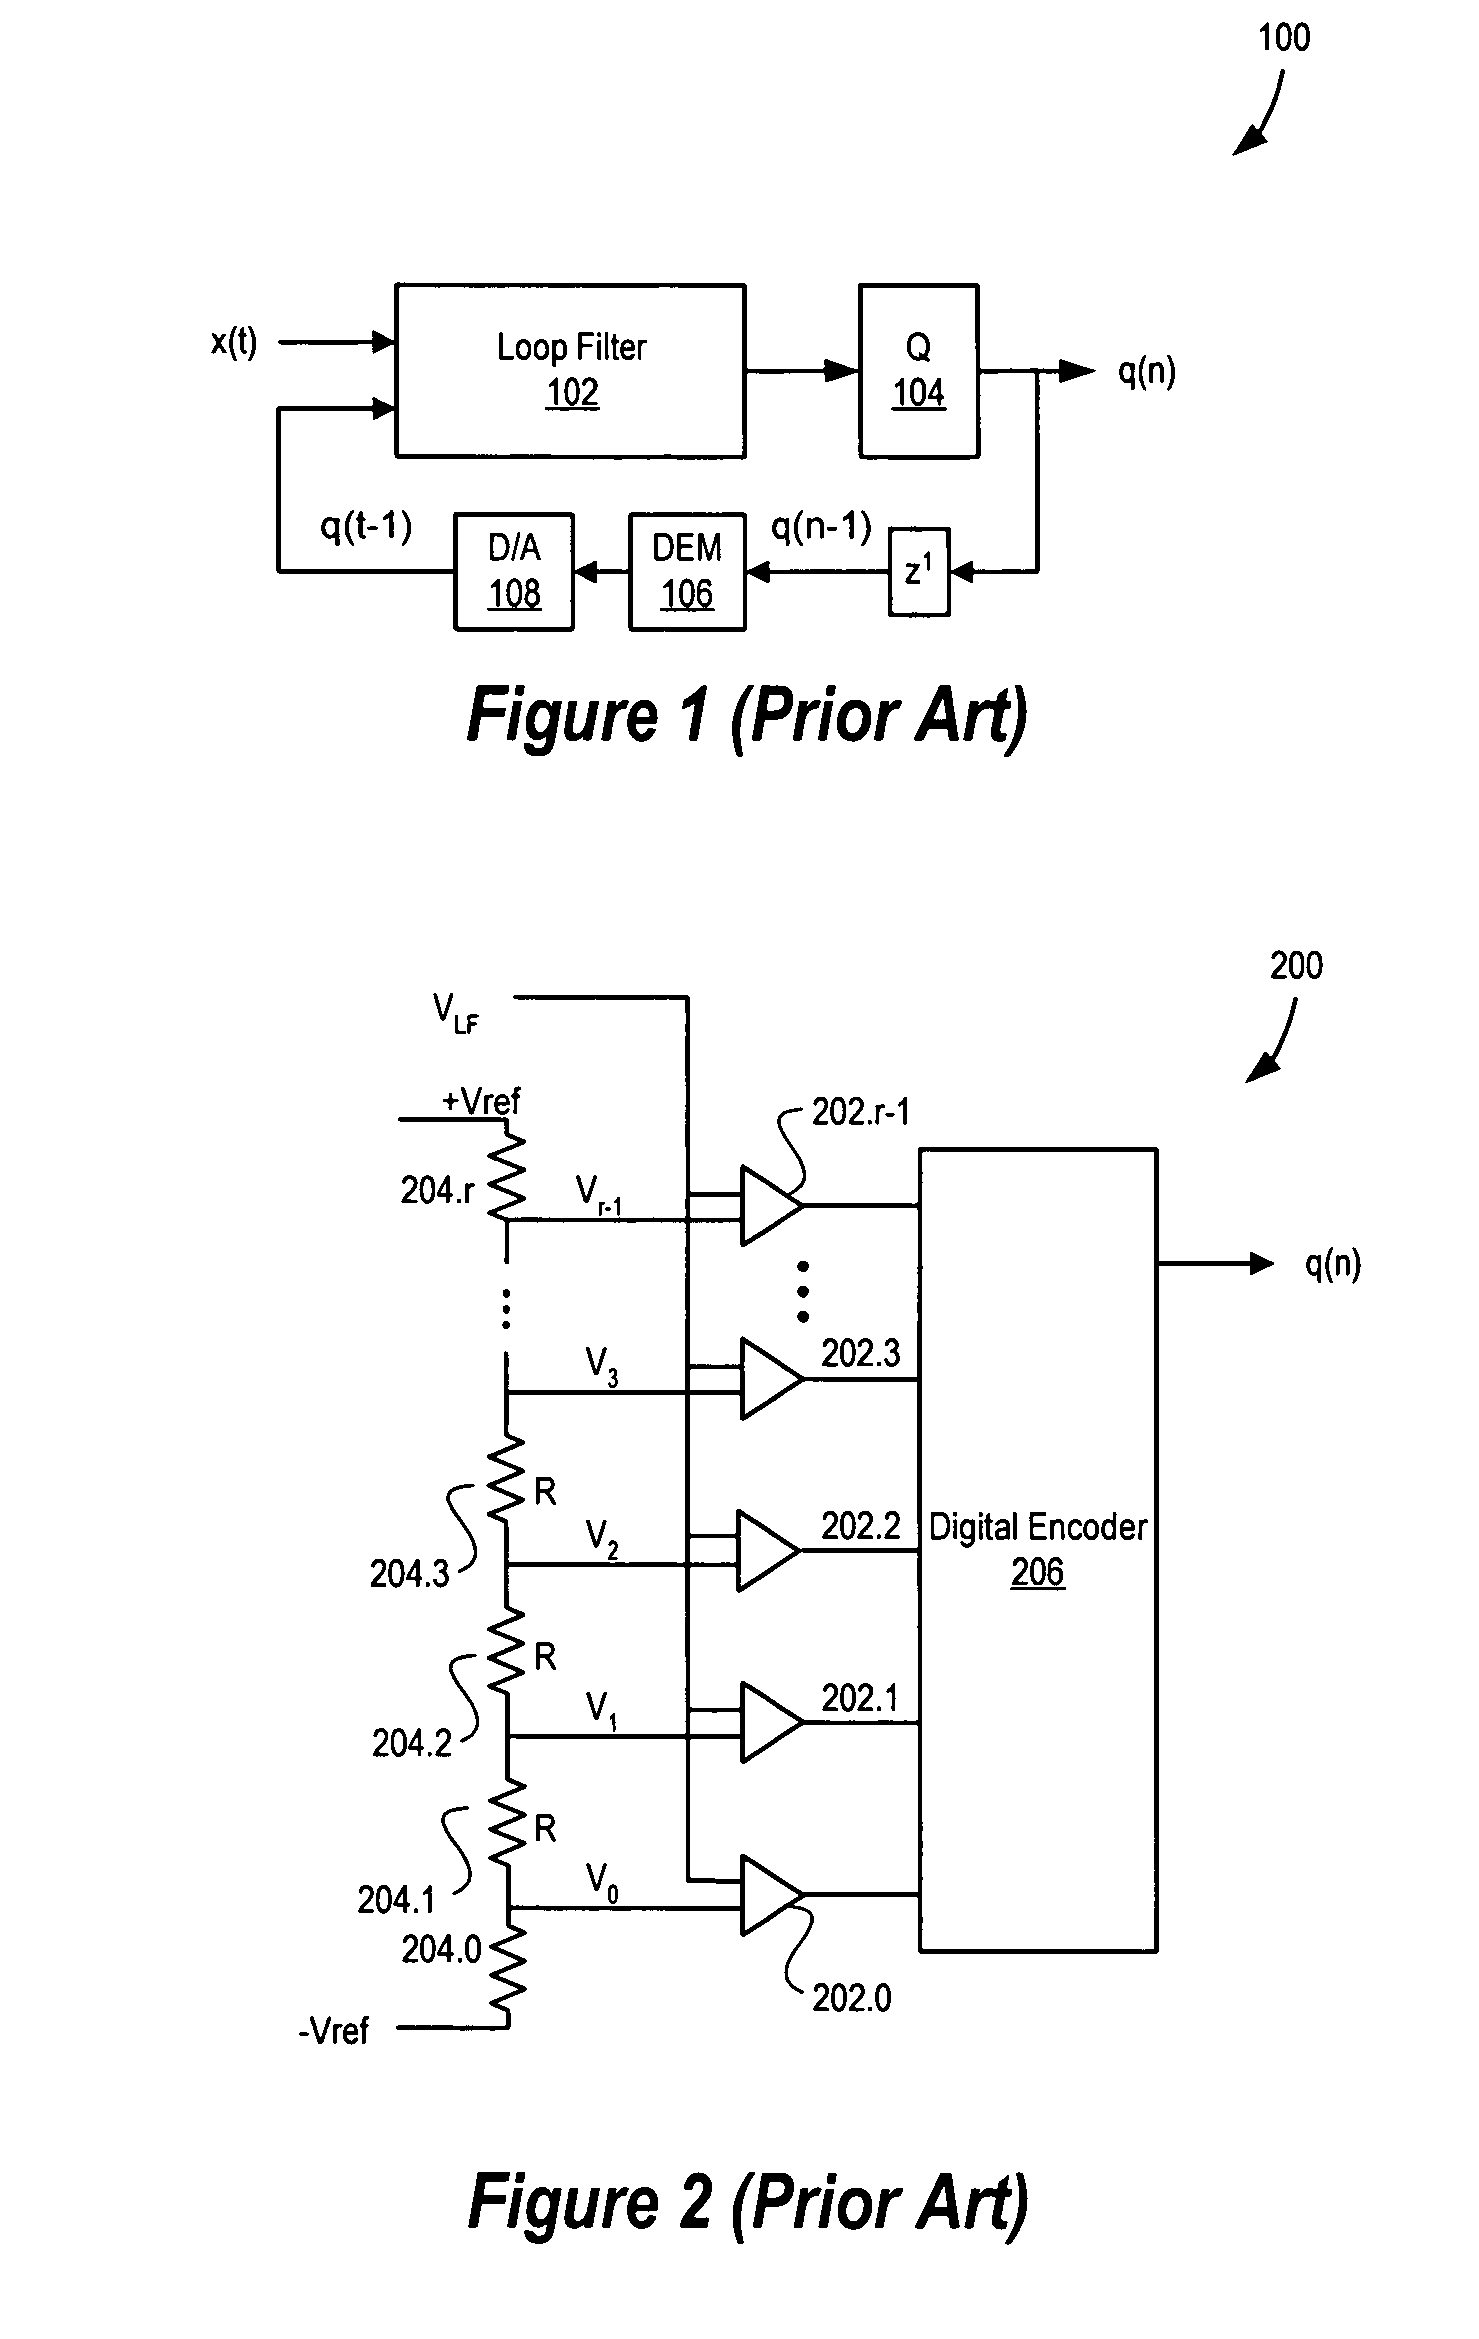 Delta sigma modulator analog-to-digital converters with quantizer output prediction and comparator reduction